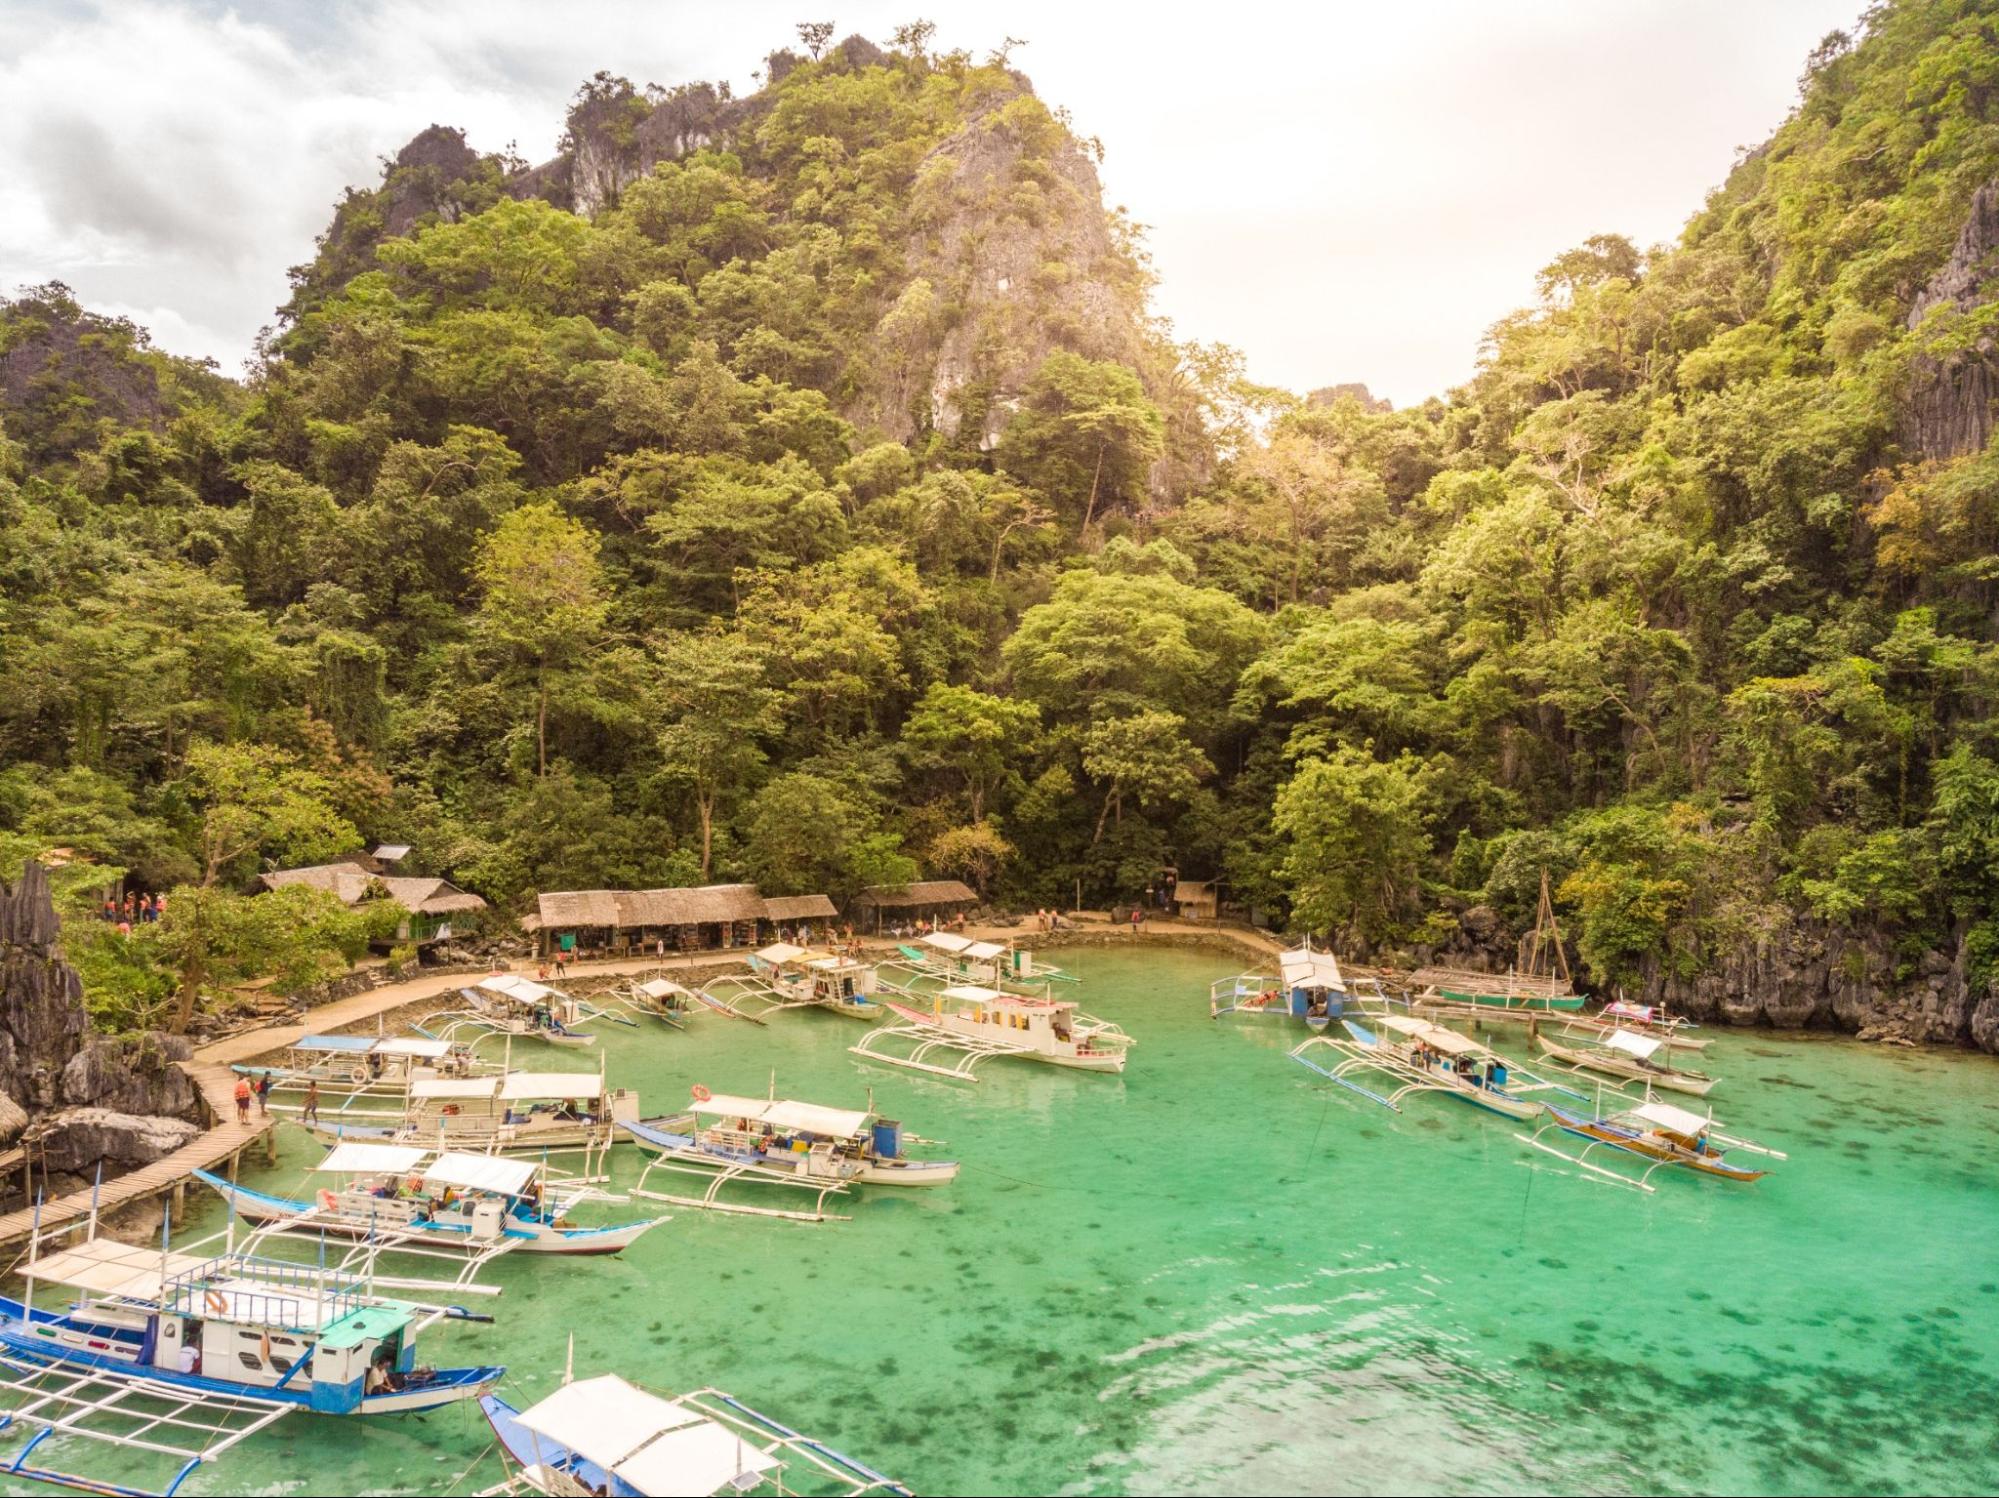 Blue crystal water in paradise Bay with boats on the wooden pier at Kayangan Lake in Coron island